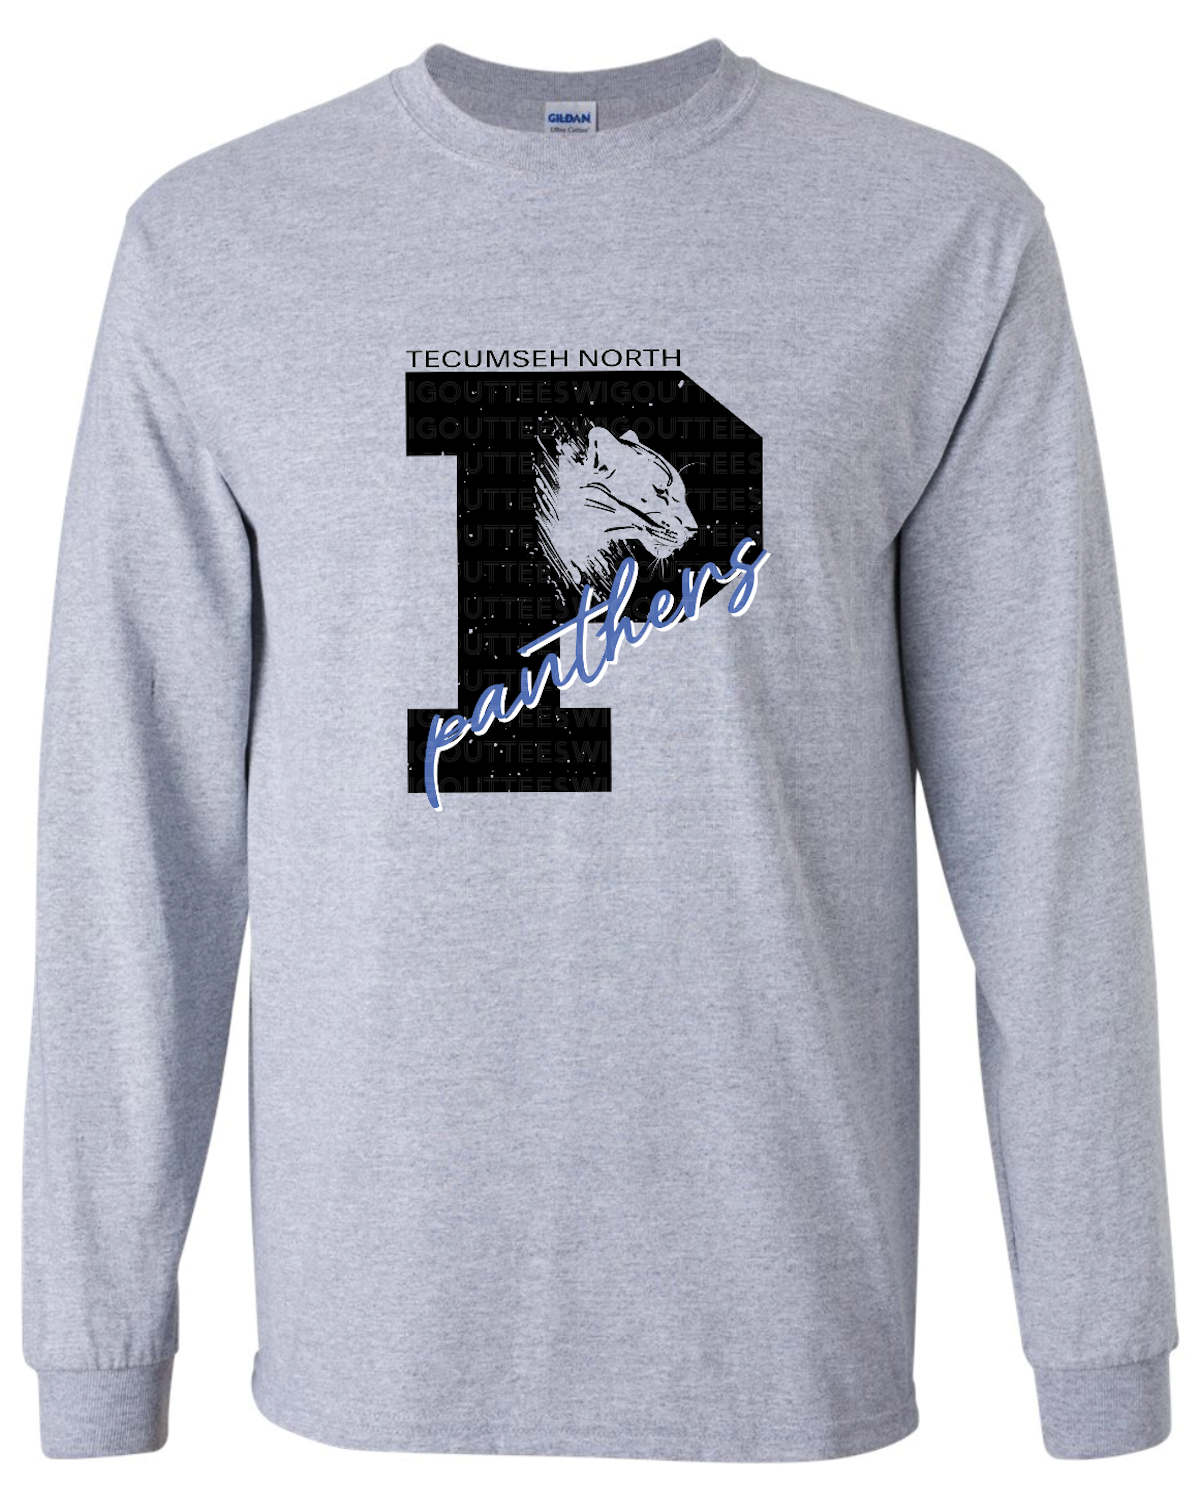 P is for Panther Long Sleeve T-Shirt